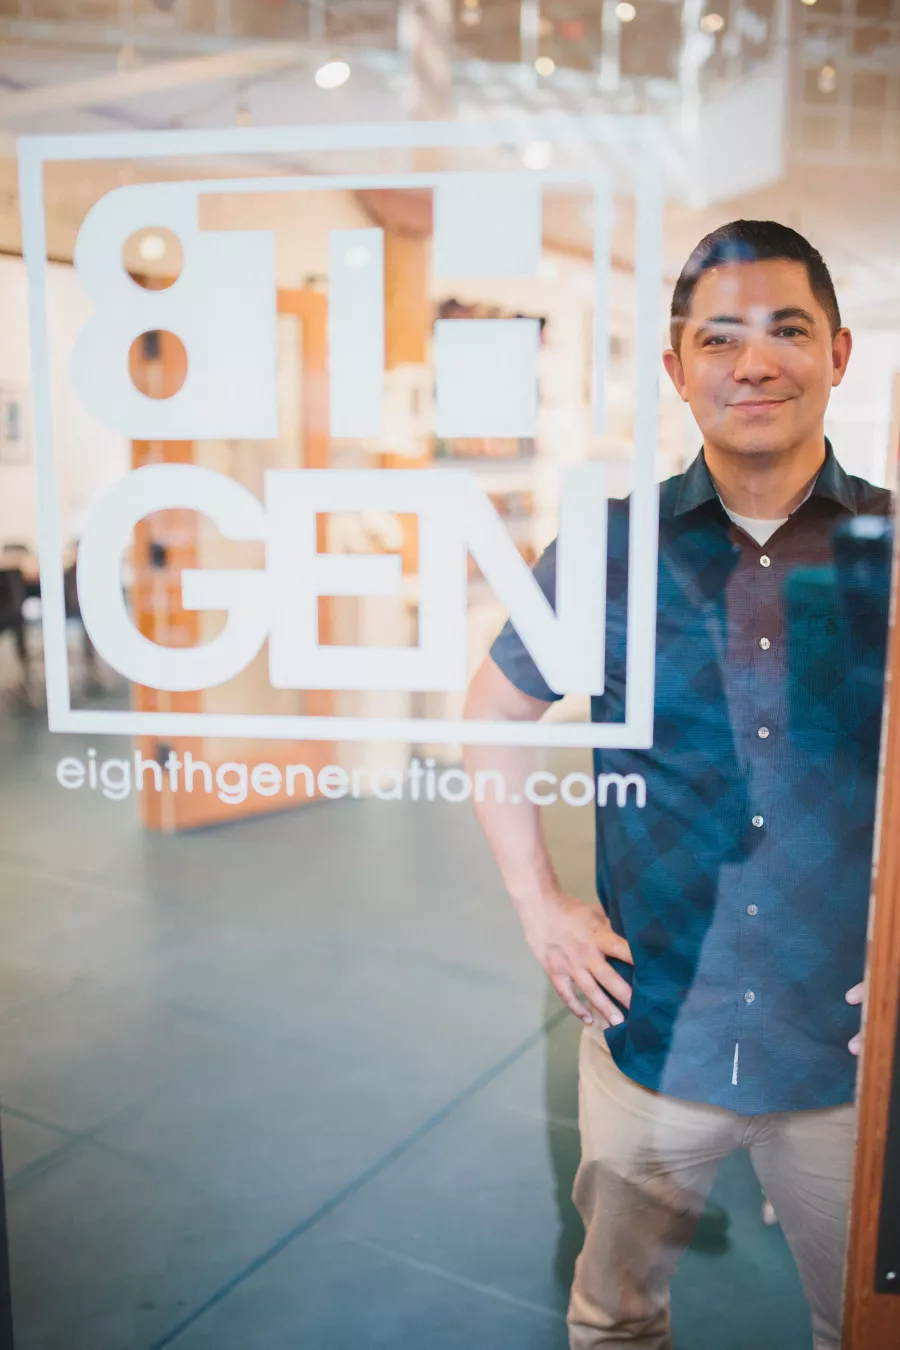 Louie Gong seen through the window of his Eight Generation store